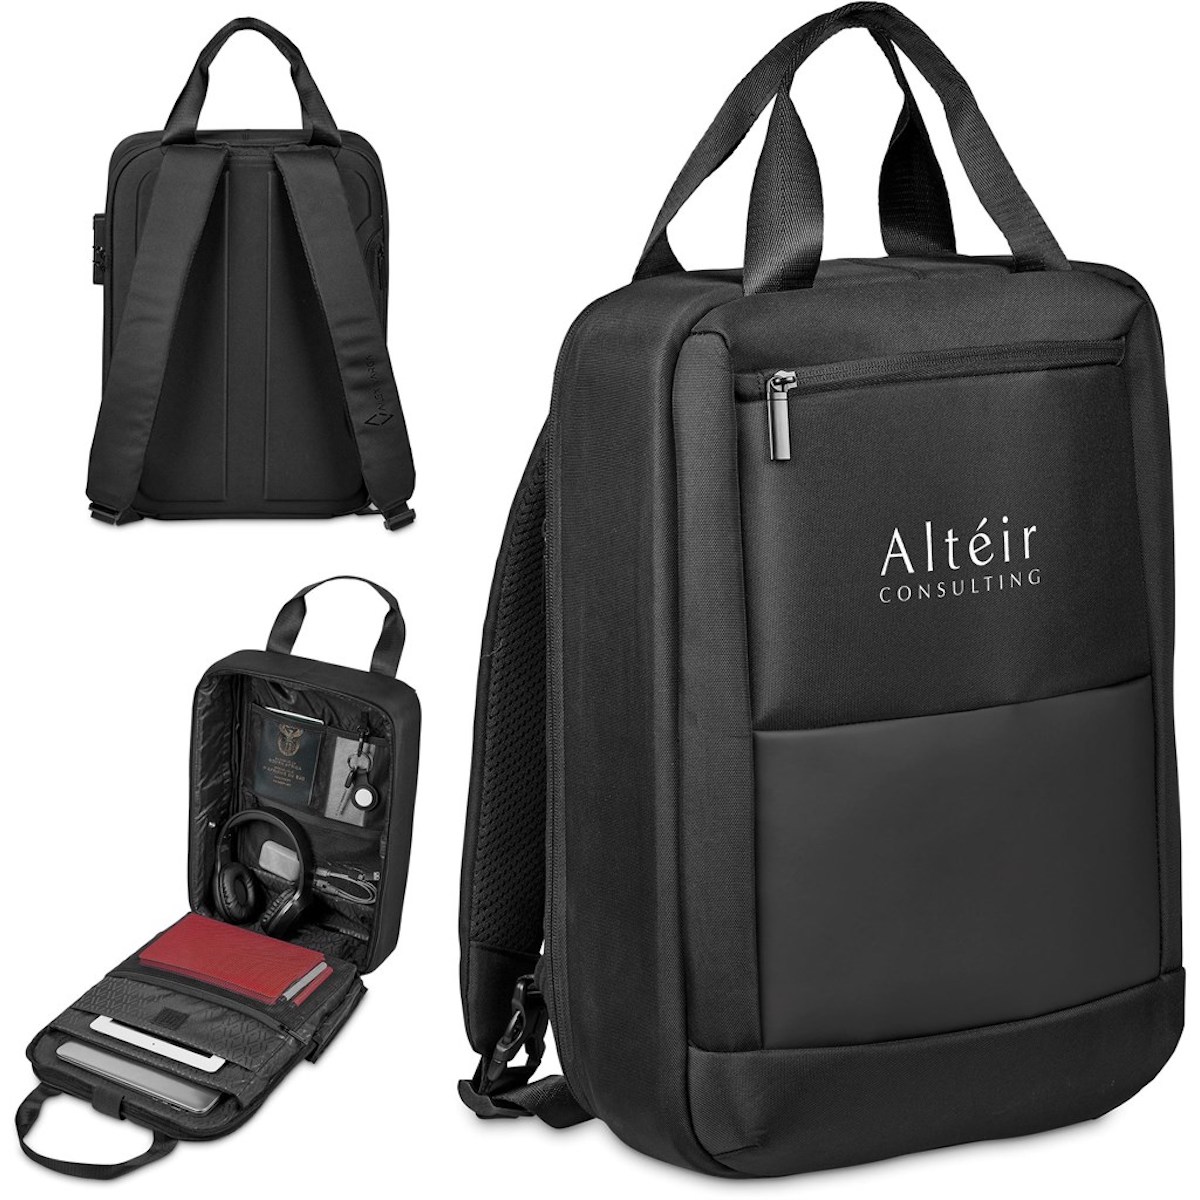 laptop backpack as a promotional product